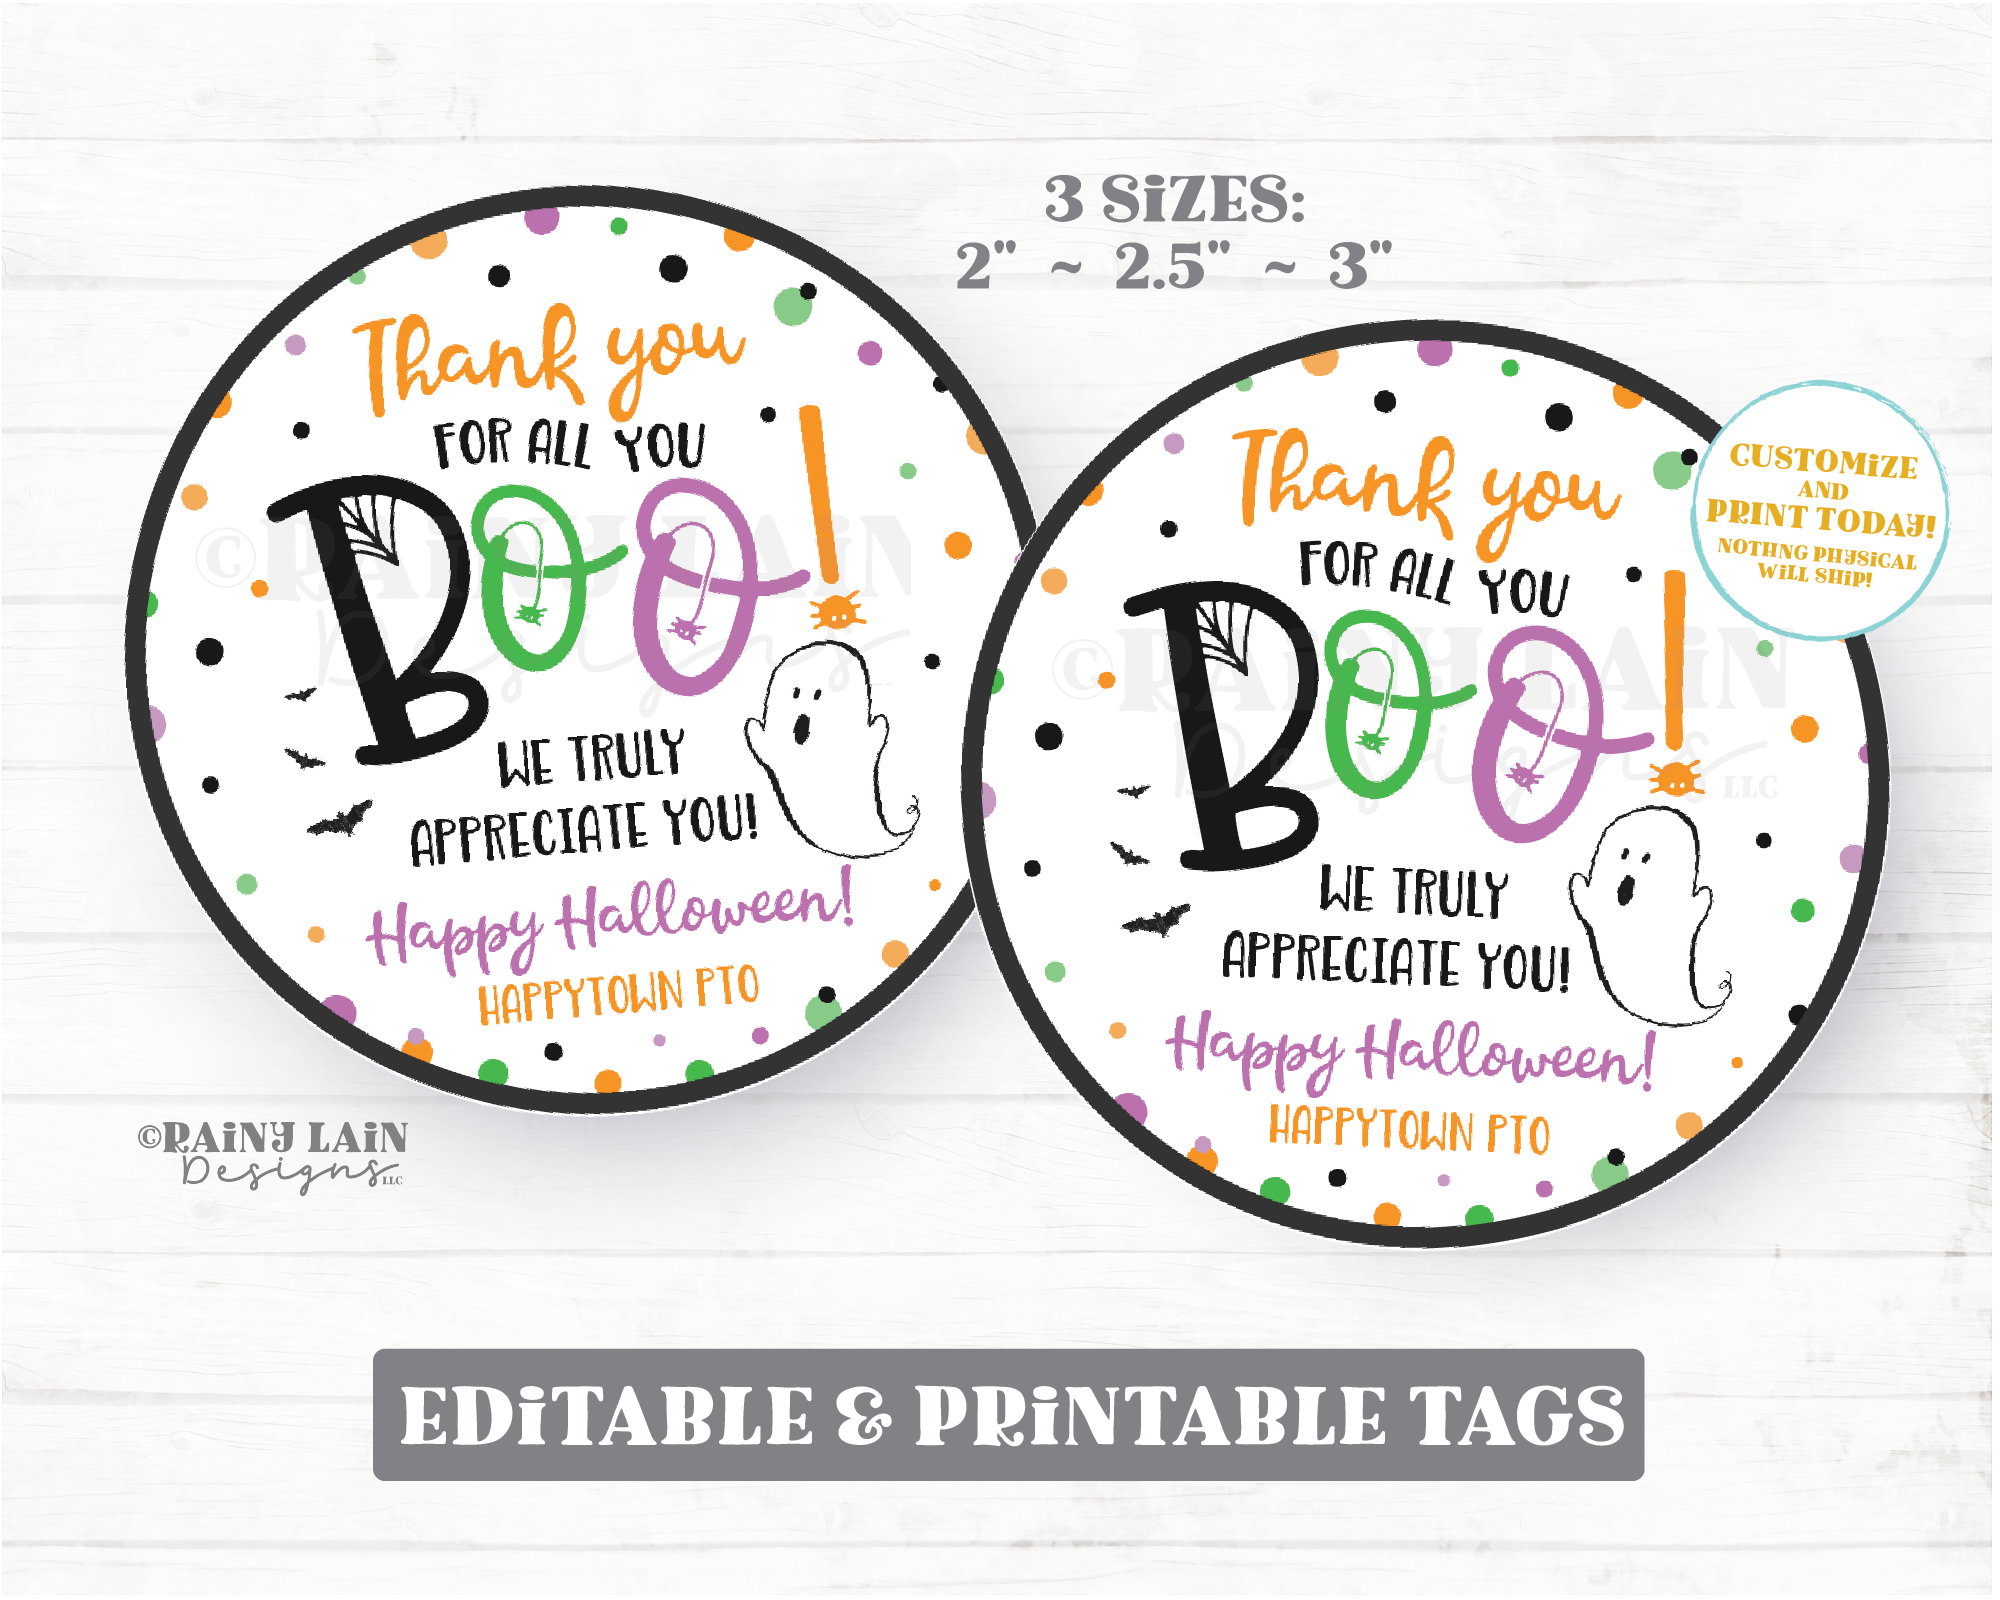 Thank you for all you boo Tag Round Halloween Printable Tag Editable Favor Tag Halloween thank you tag Employee Teacher Staff School PTO PTA